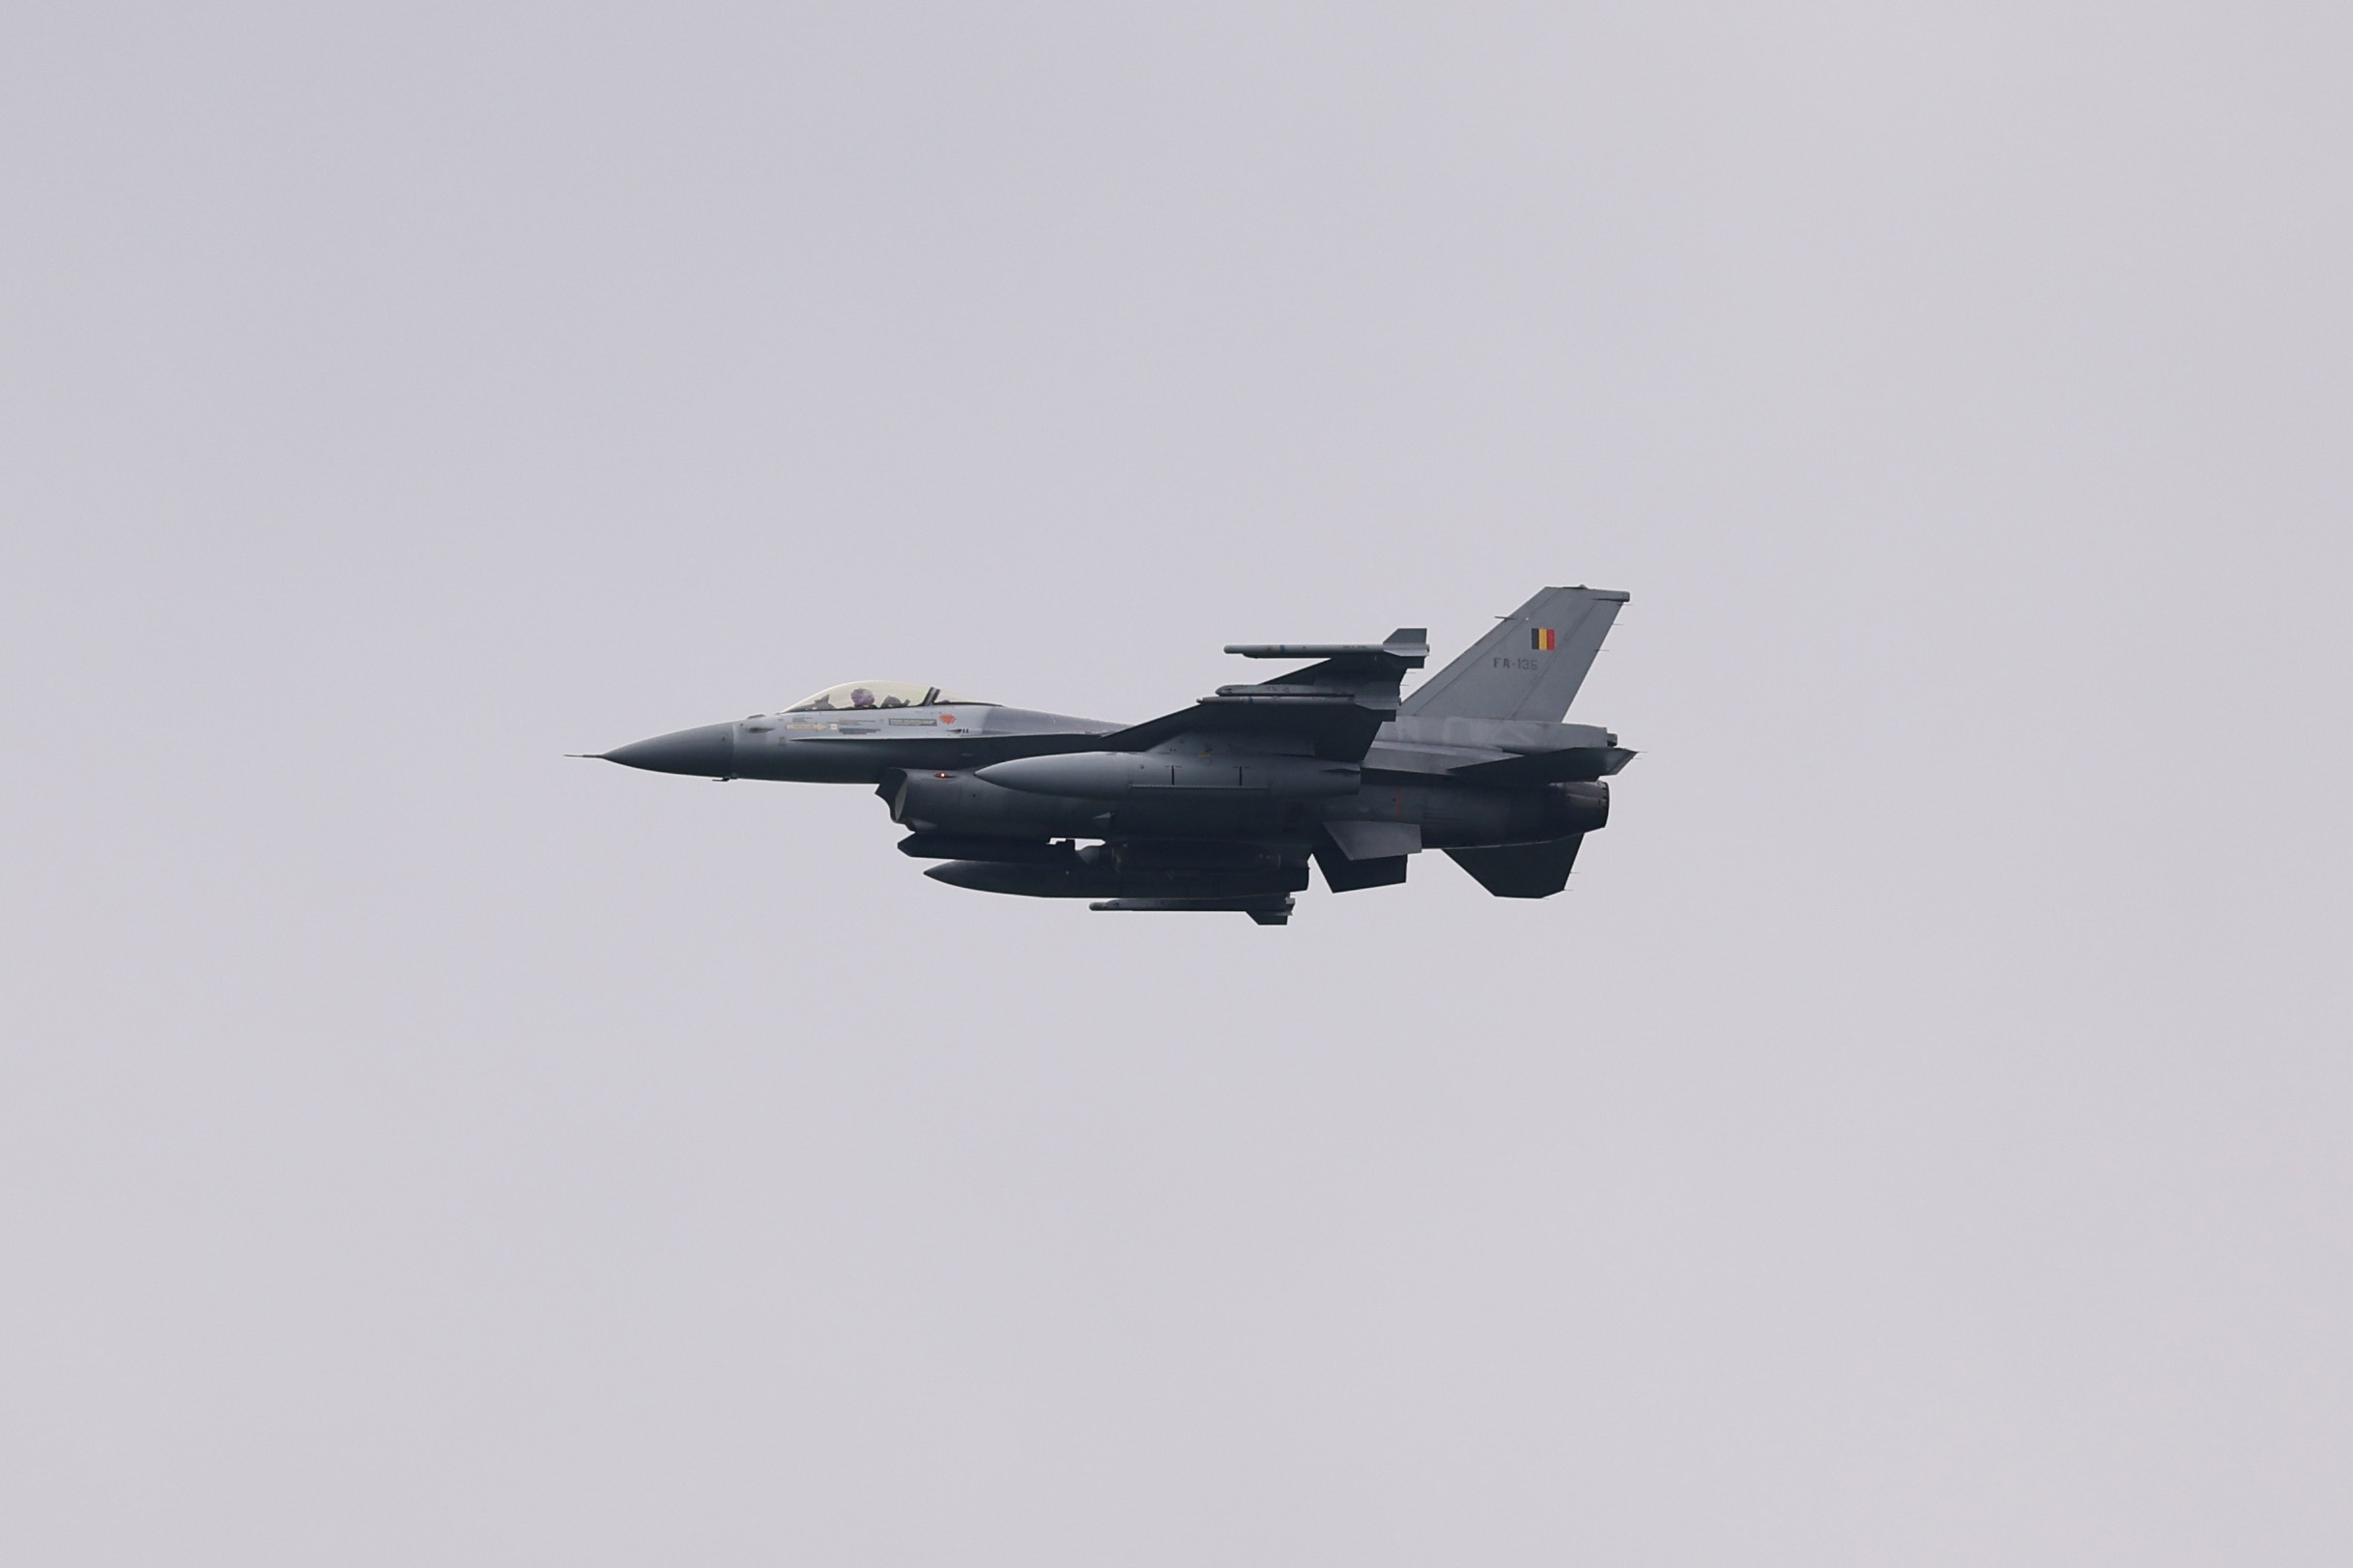 A Belgian Air Force F-16 is seen flying over the Rinkven International Golf Club on May 12, in Anterwp, Belgium.